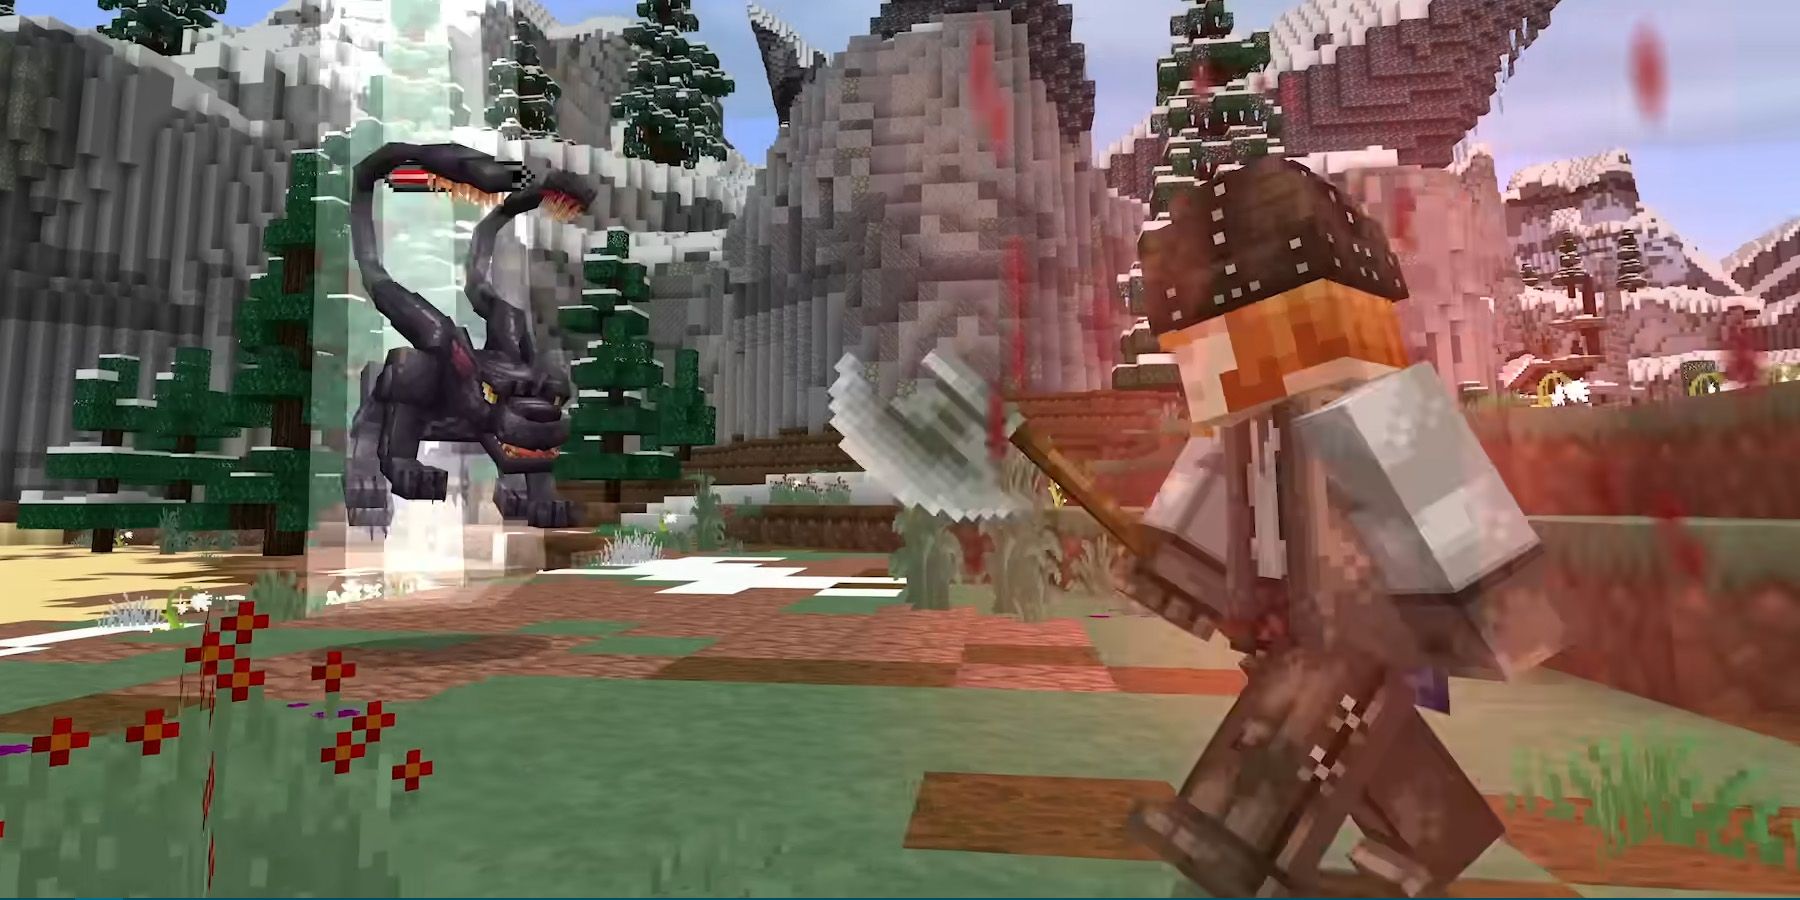 Every Class In Minecraft’s Dungeons & Dragons DLC